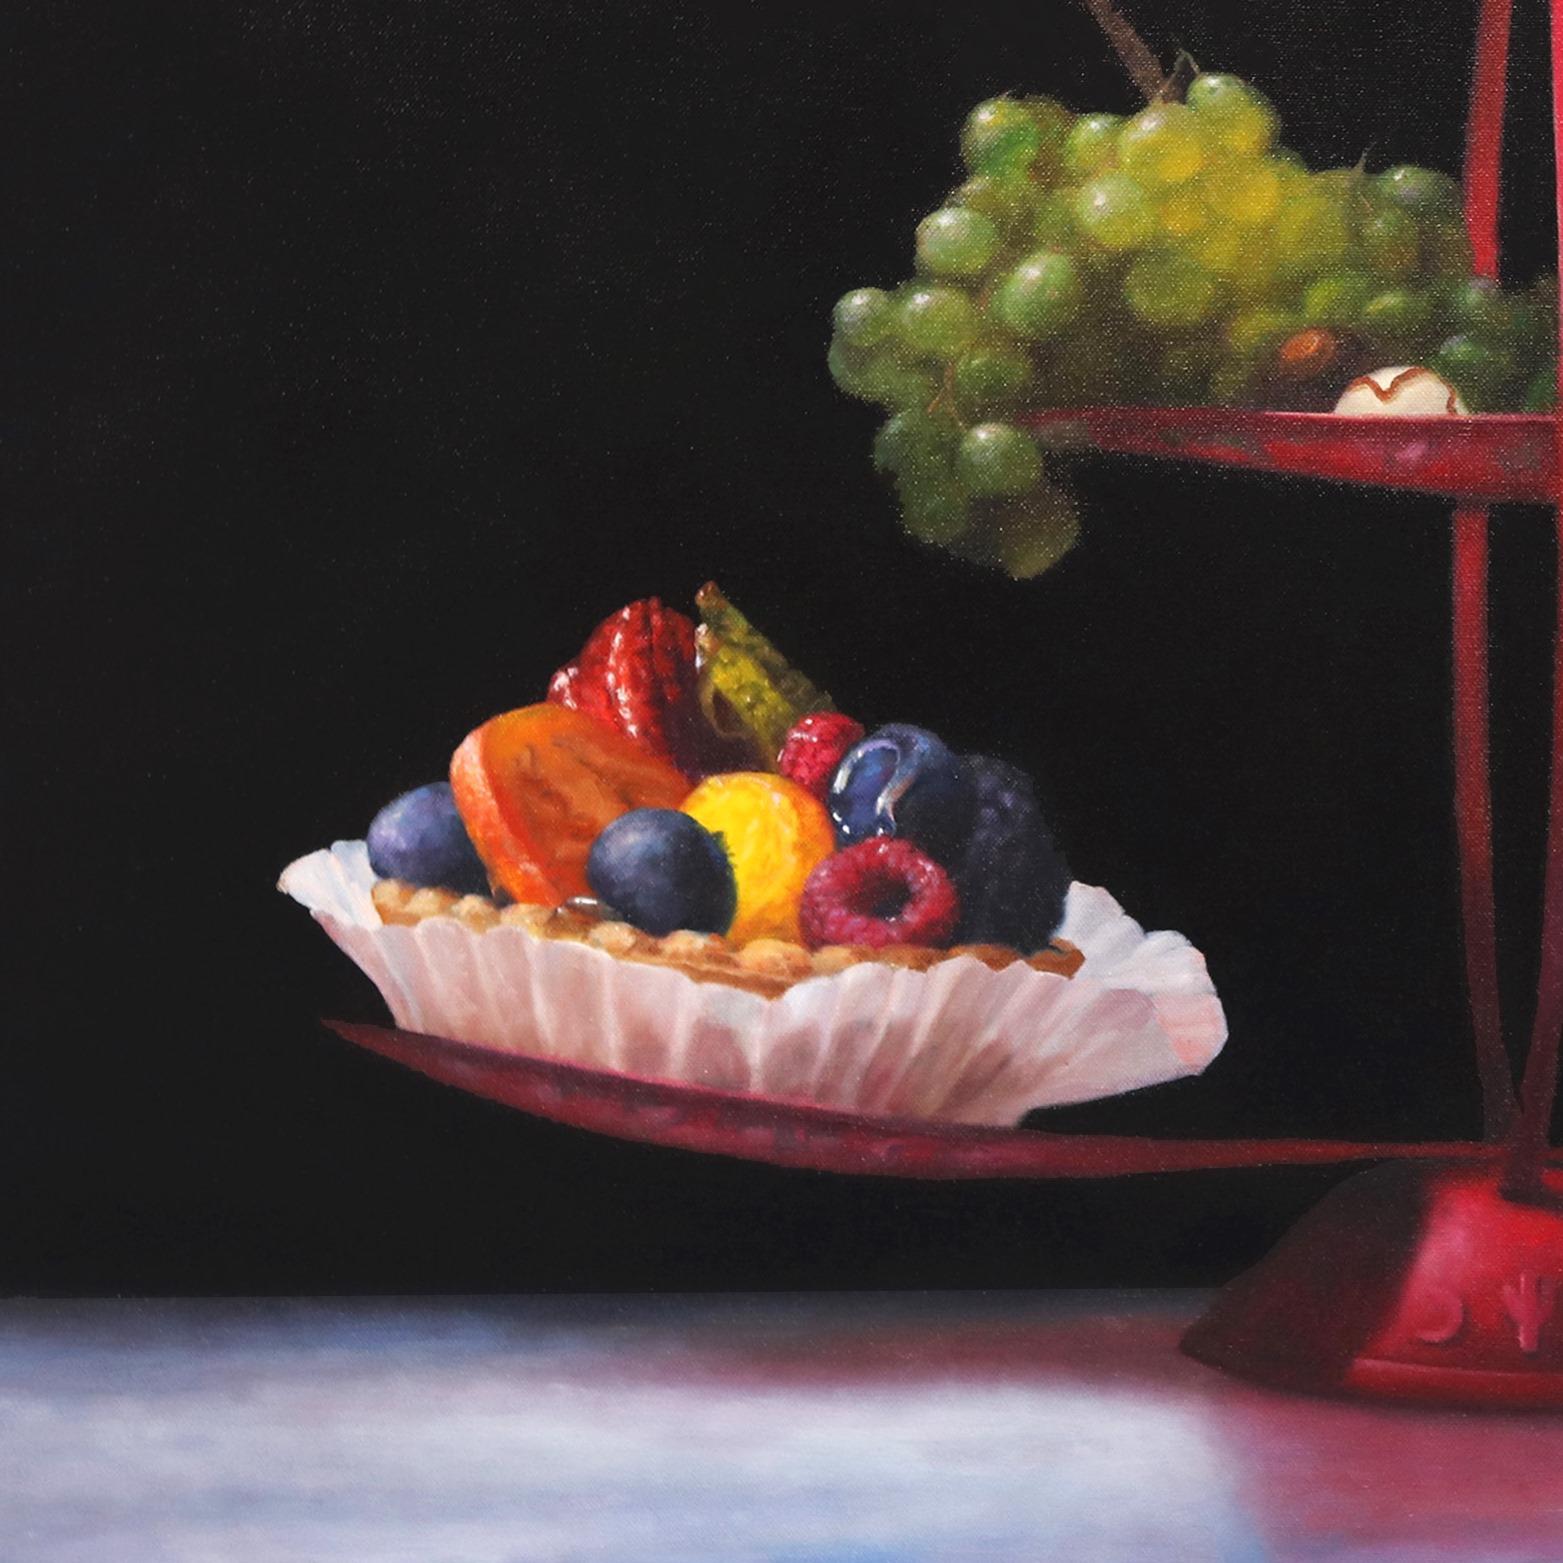 Chinese Desserts - Photorealist Fruit Tart Grapes Cupcake Colorful Oil Painting  For Sale 1